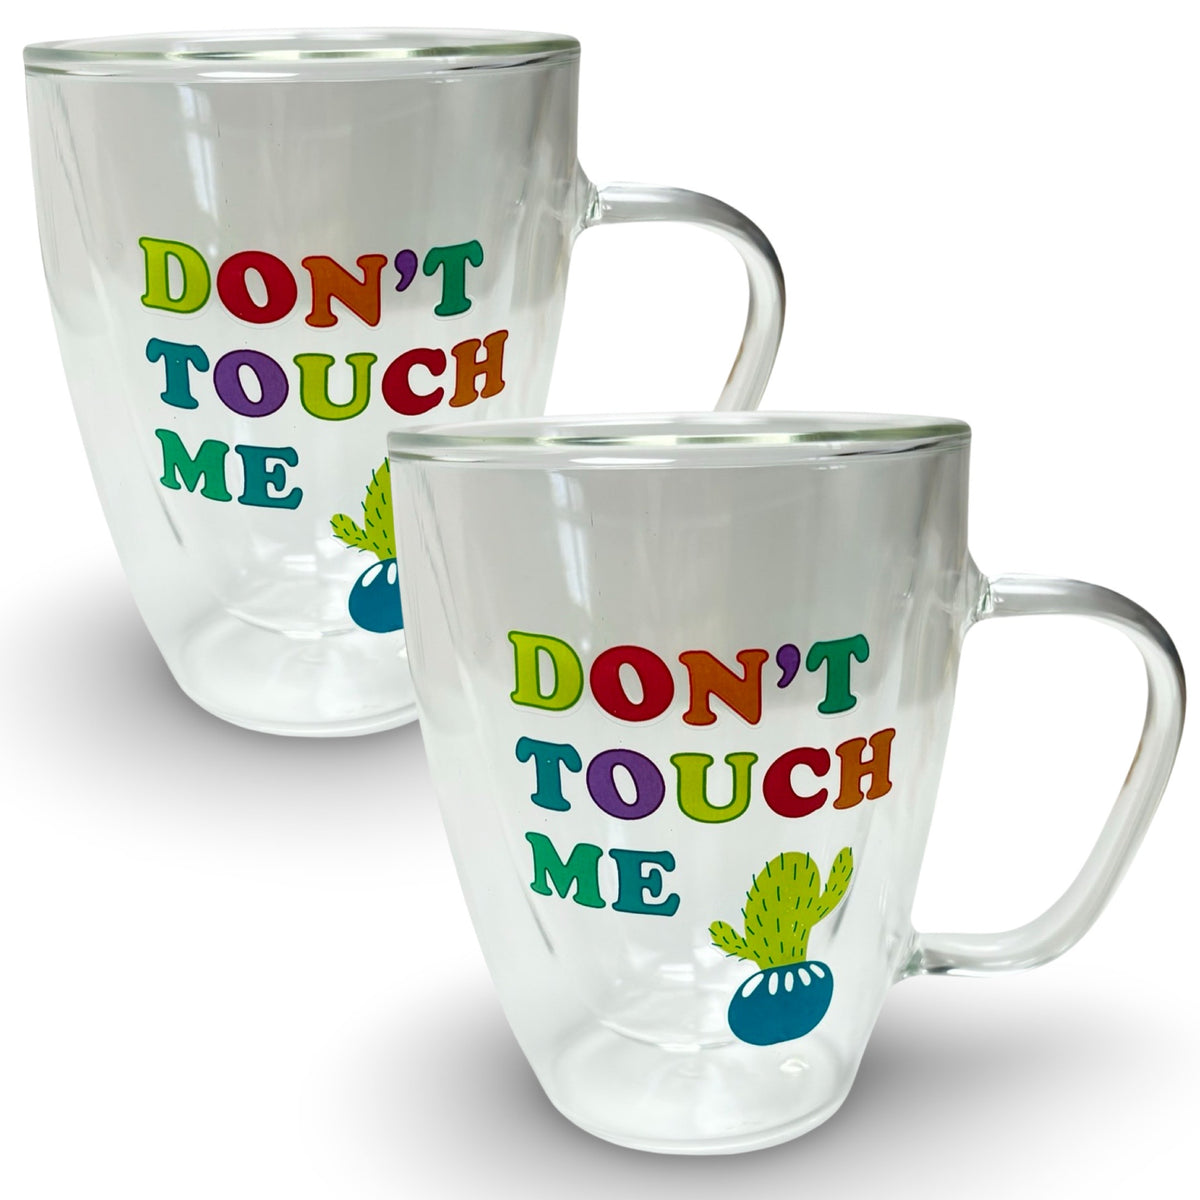 2pk Glass 8oz " Don't Touch Me" Cactus Coffee or Tea Mug by CR Gibson - Double Wall